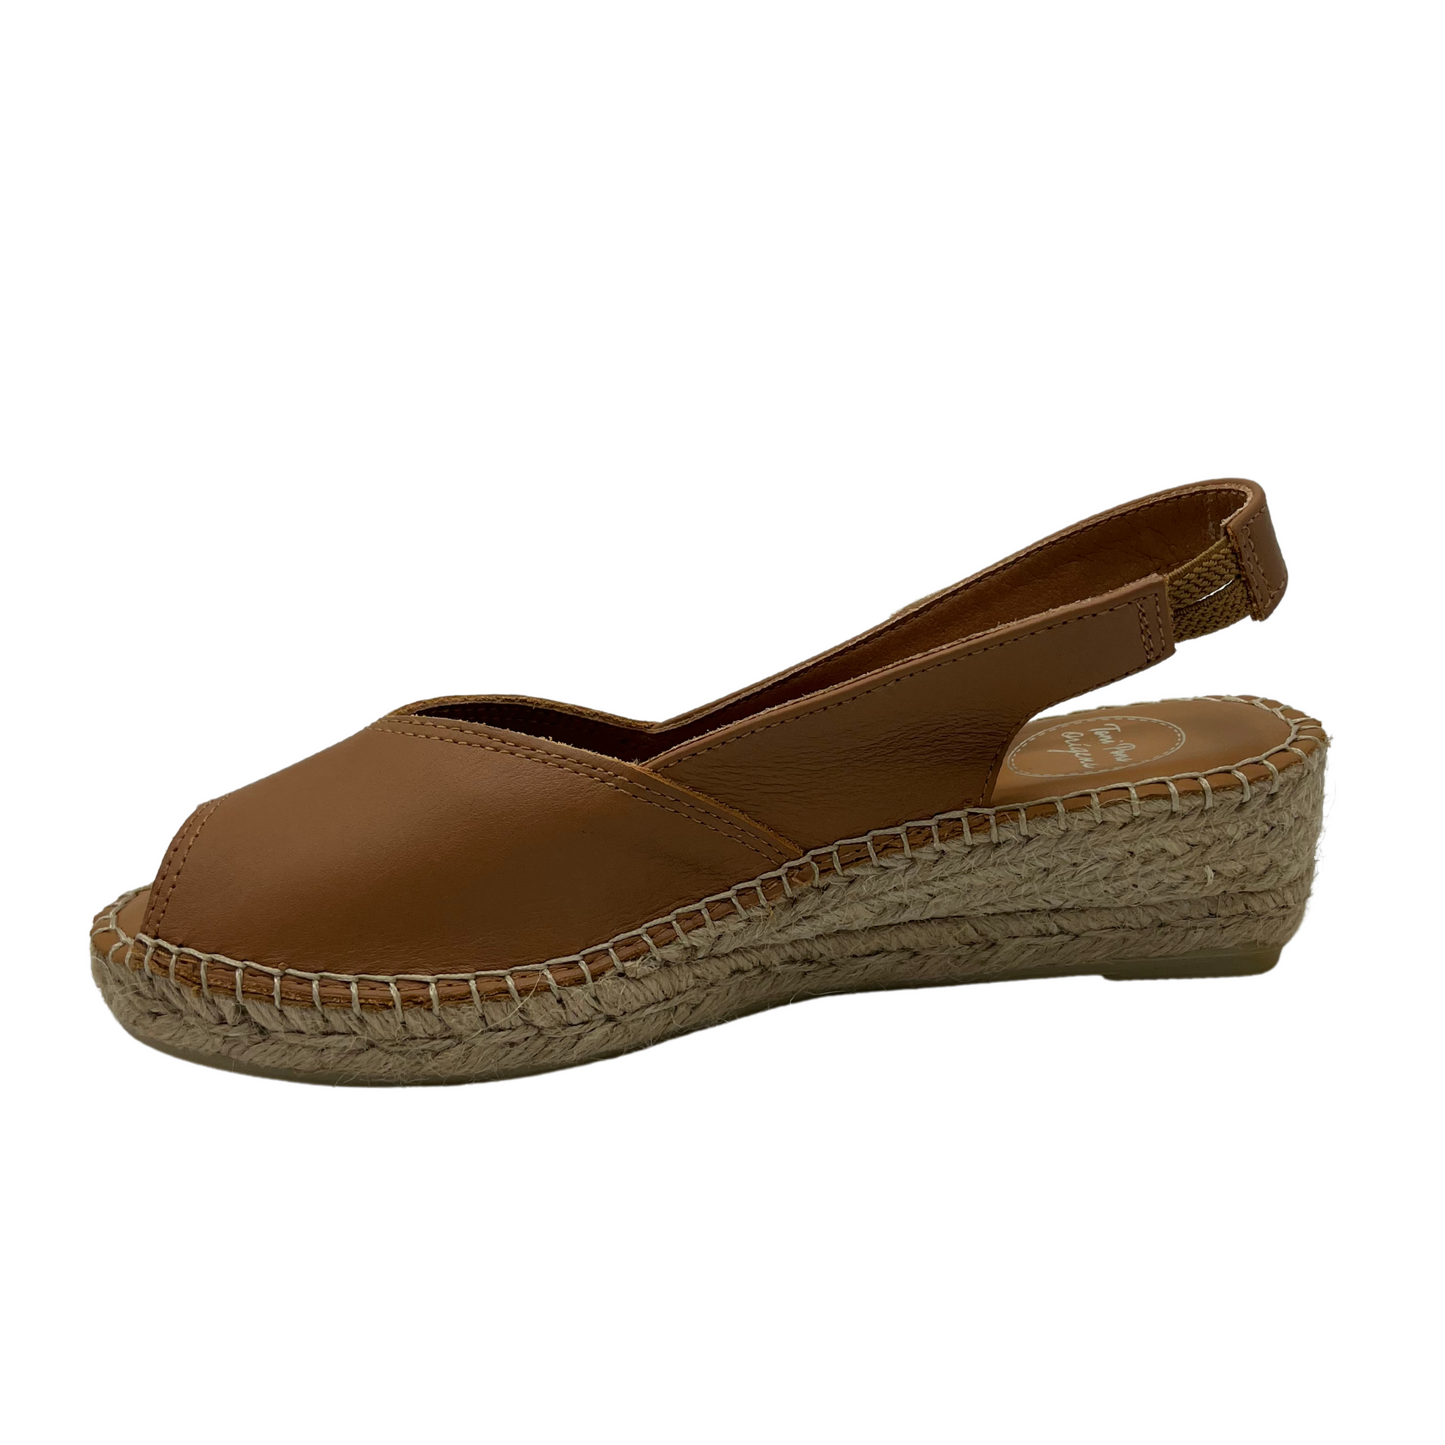 Left facing view of tan leather espadrille sandal with wedge heel and peep toe